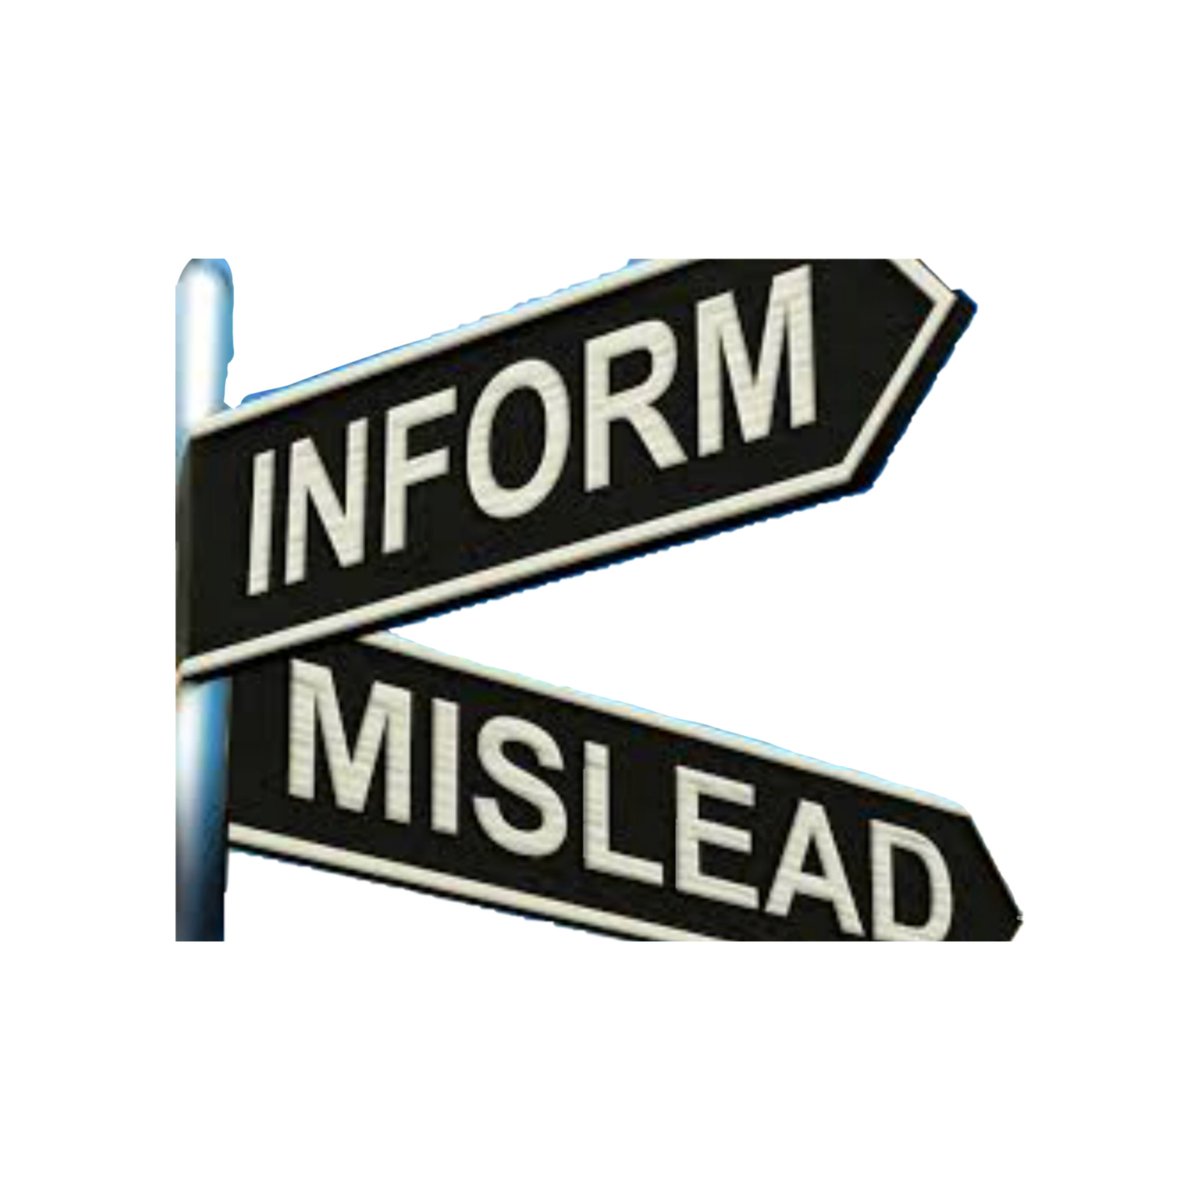 Infodemic: An excessive amount of misinformation or false information spreading rapidly, often exacerbated by social media and digital platforms.

Explanation: Infodemics can undermine public trust, create confusion, and hinder efforts to address real-world issues such as public